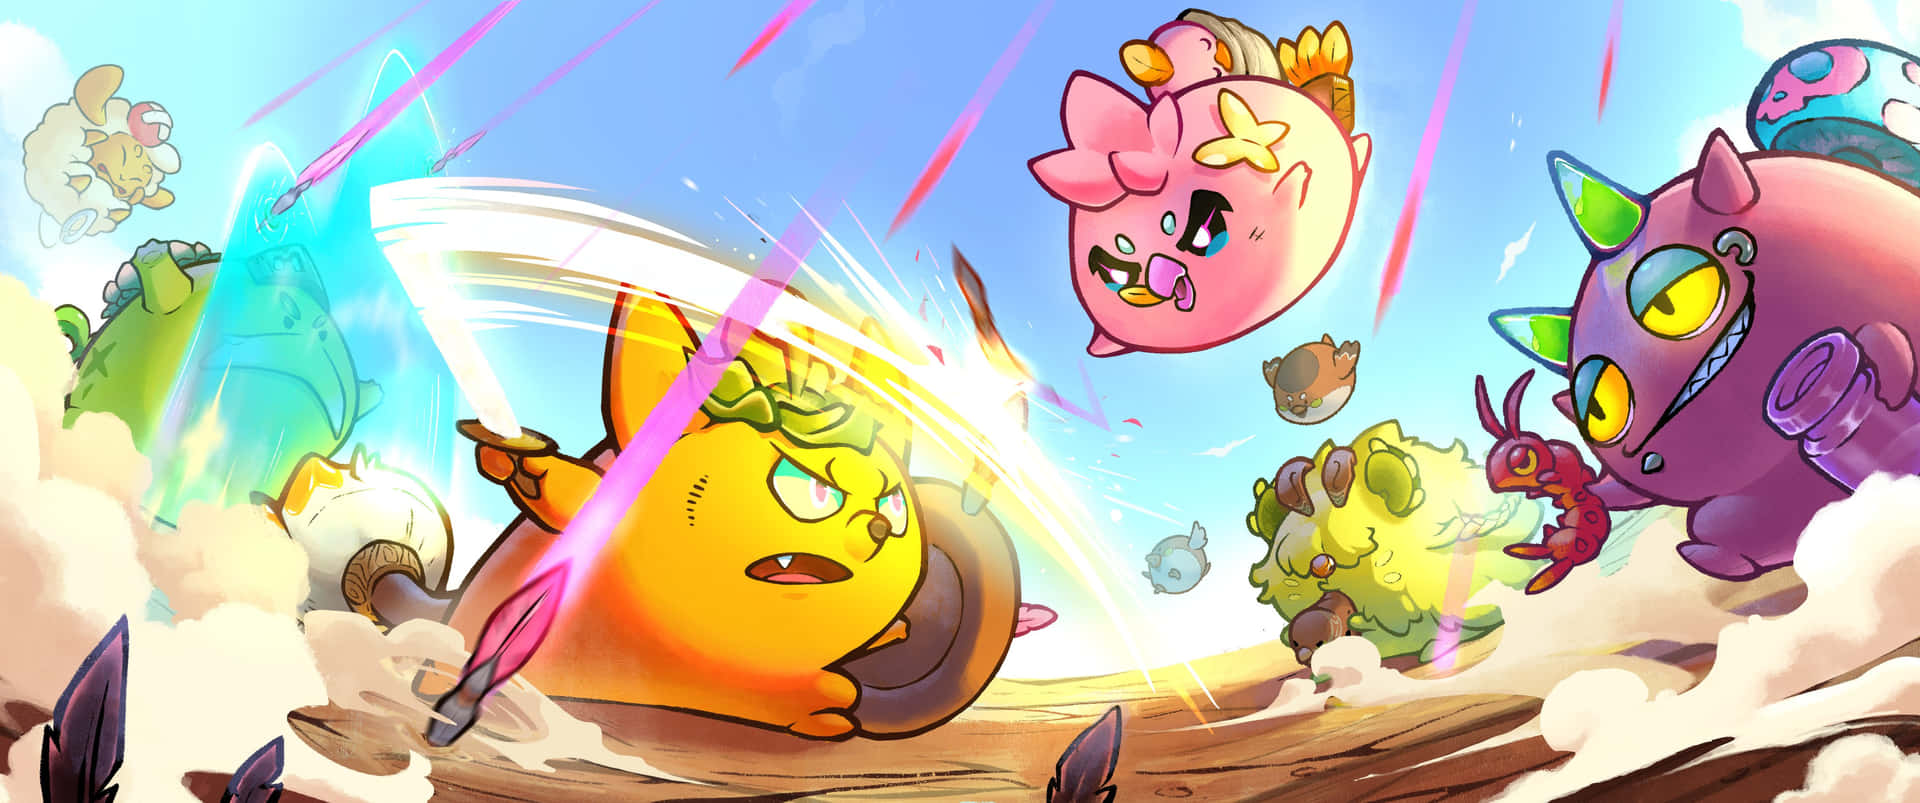 A Cartoon Of A Group Of Cartoon Characters Fighting